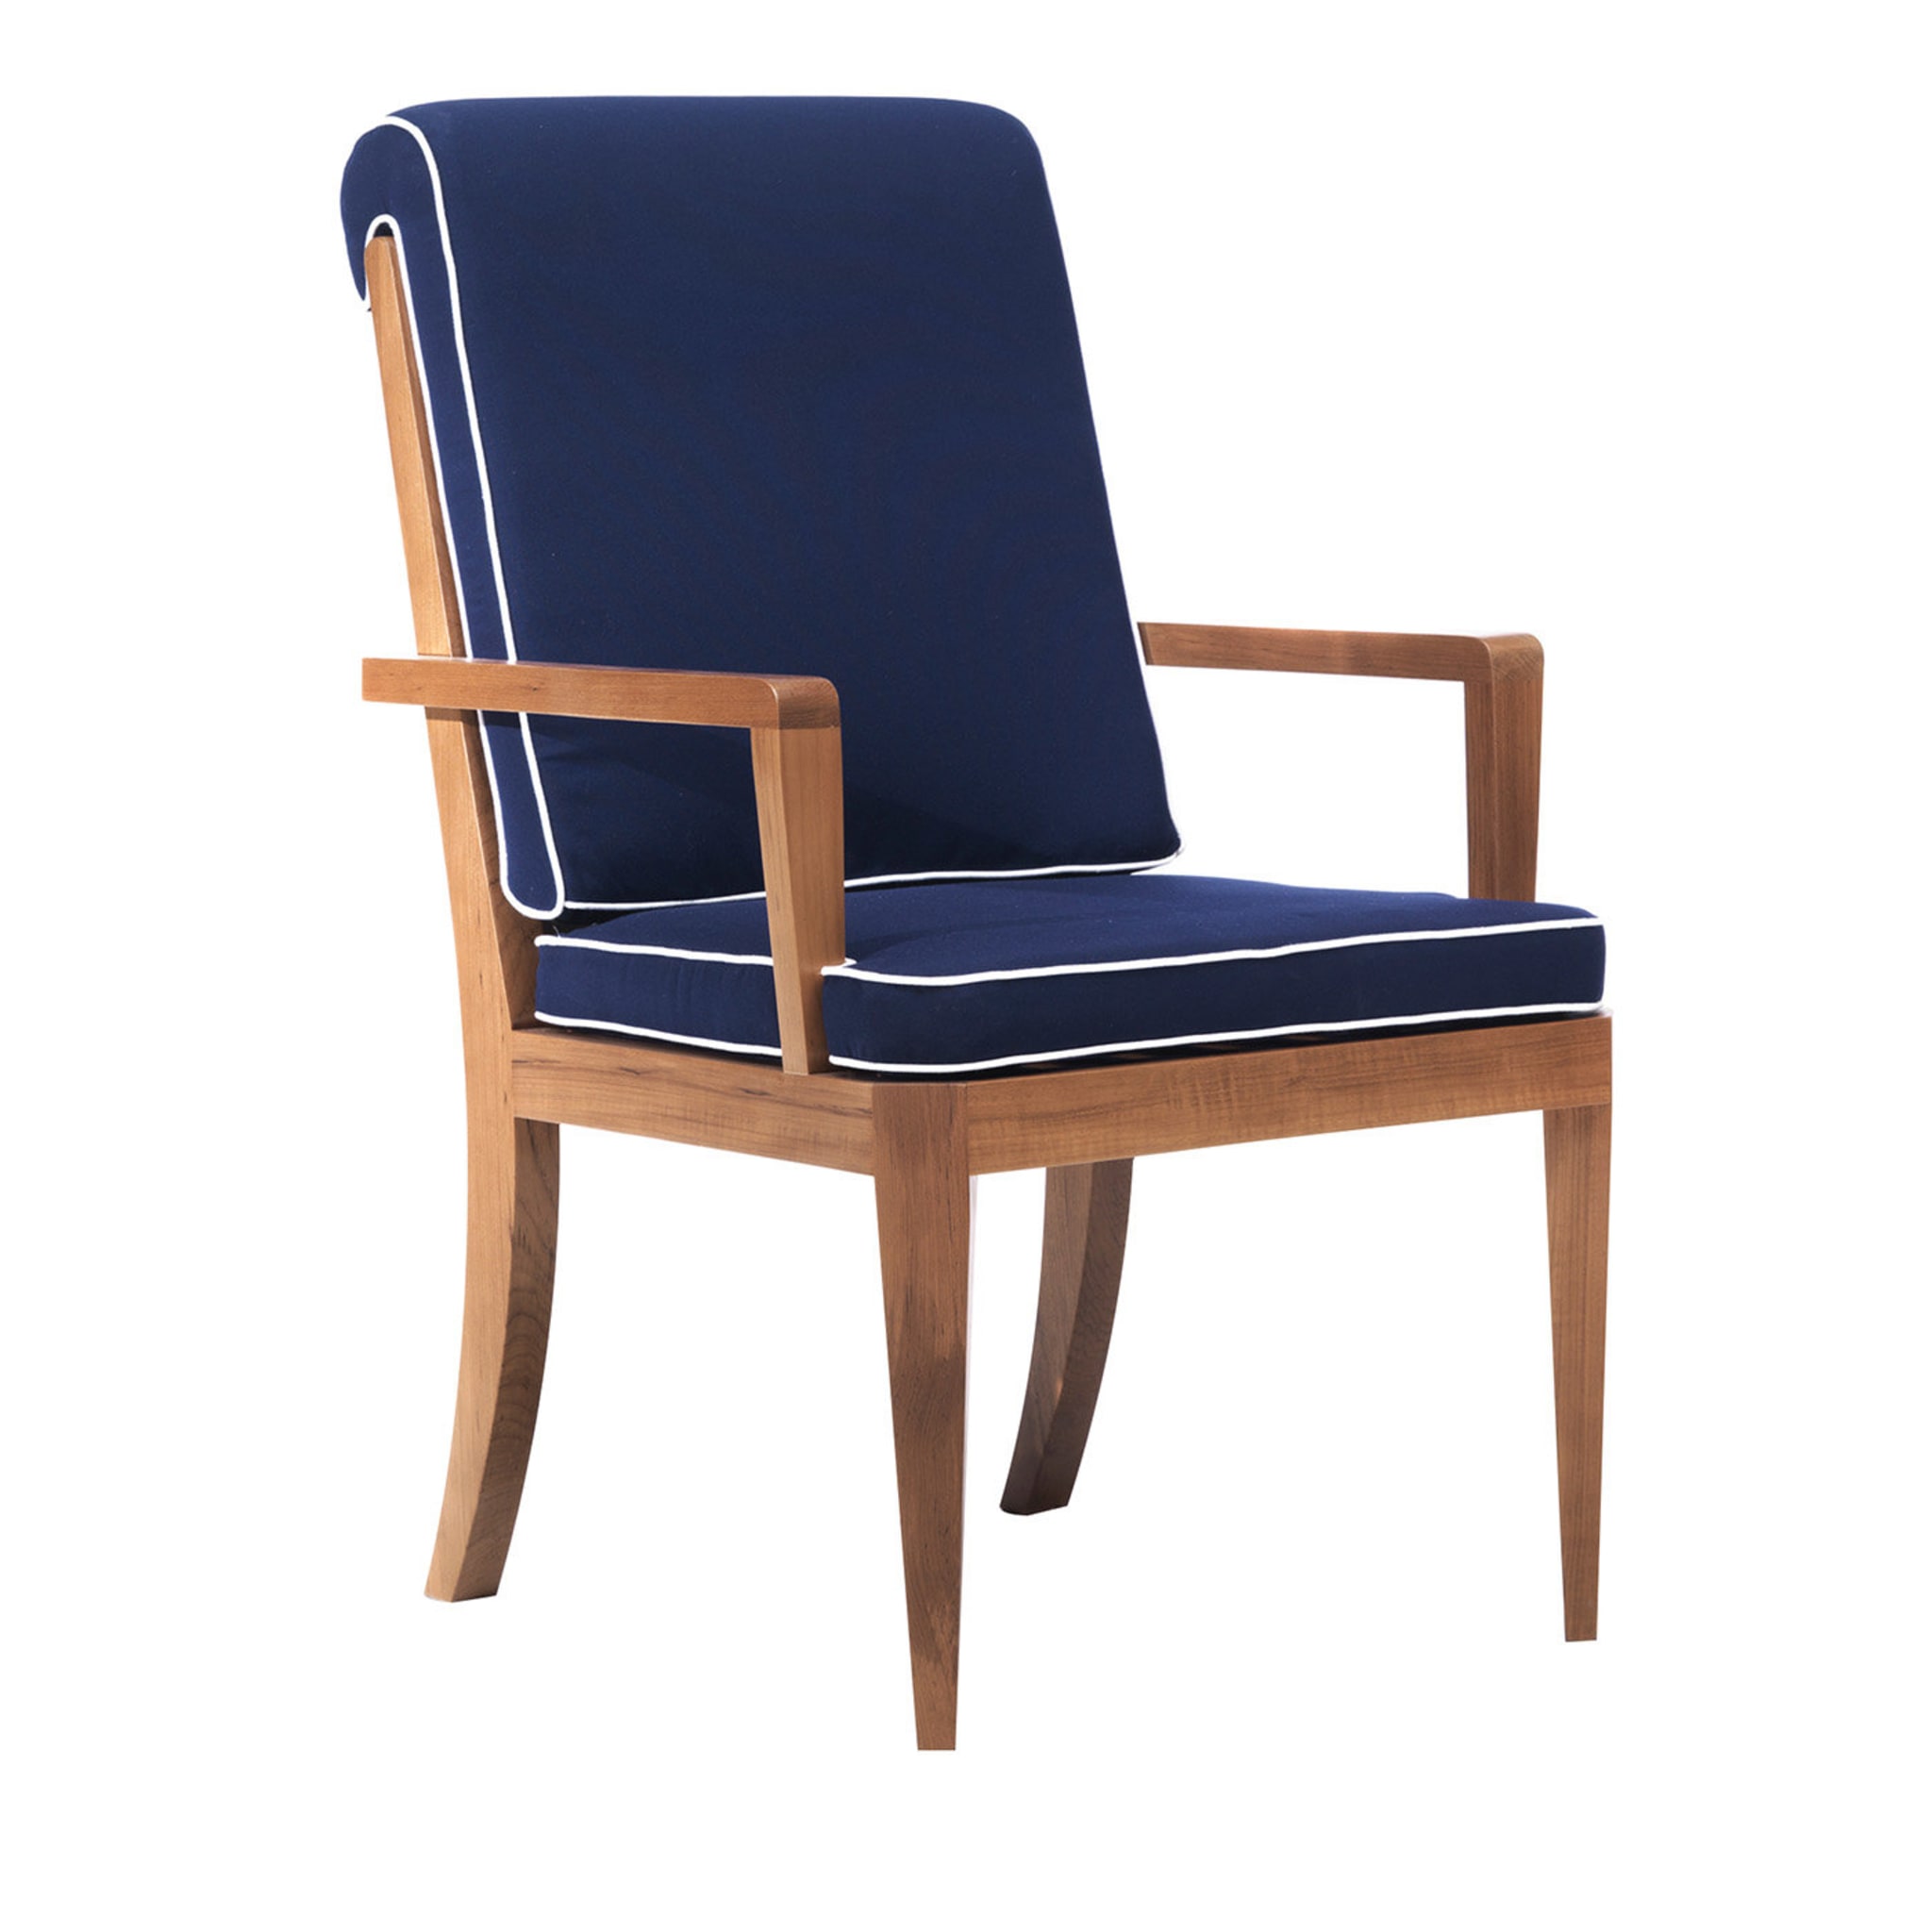 Teak Armchair by Simone Ciarmoli and Miguel Queda - Main view